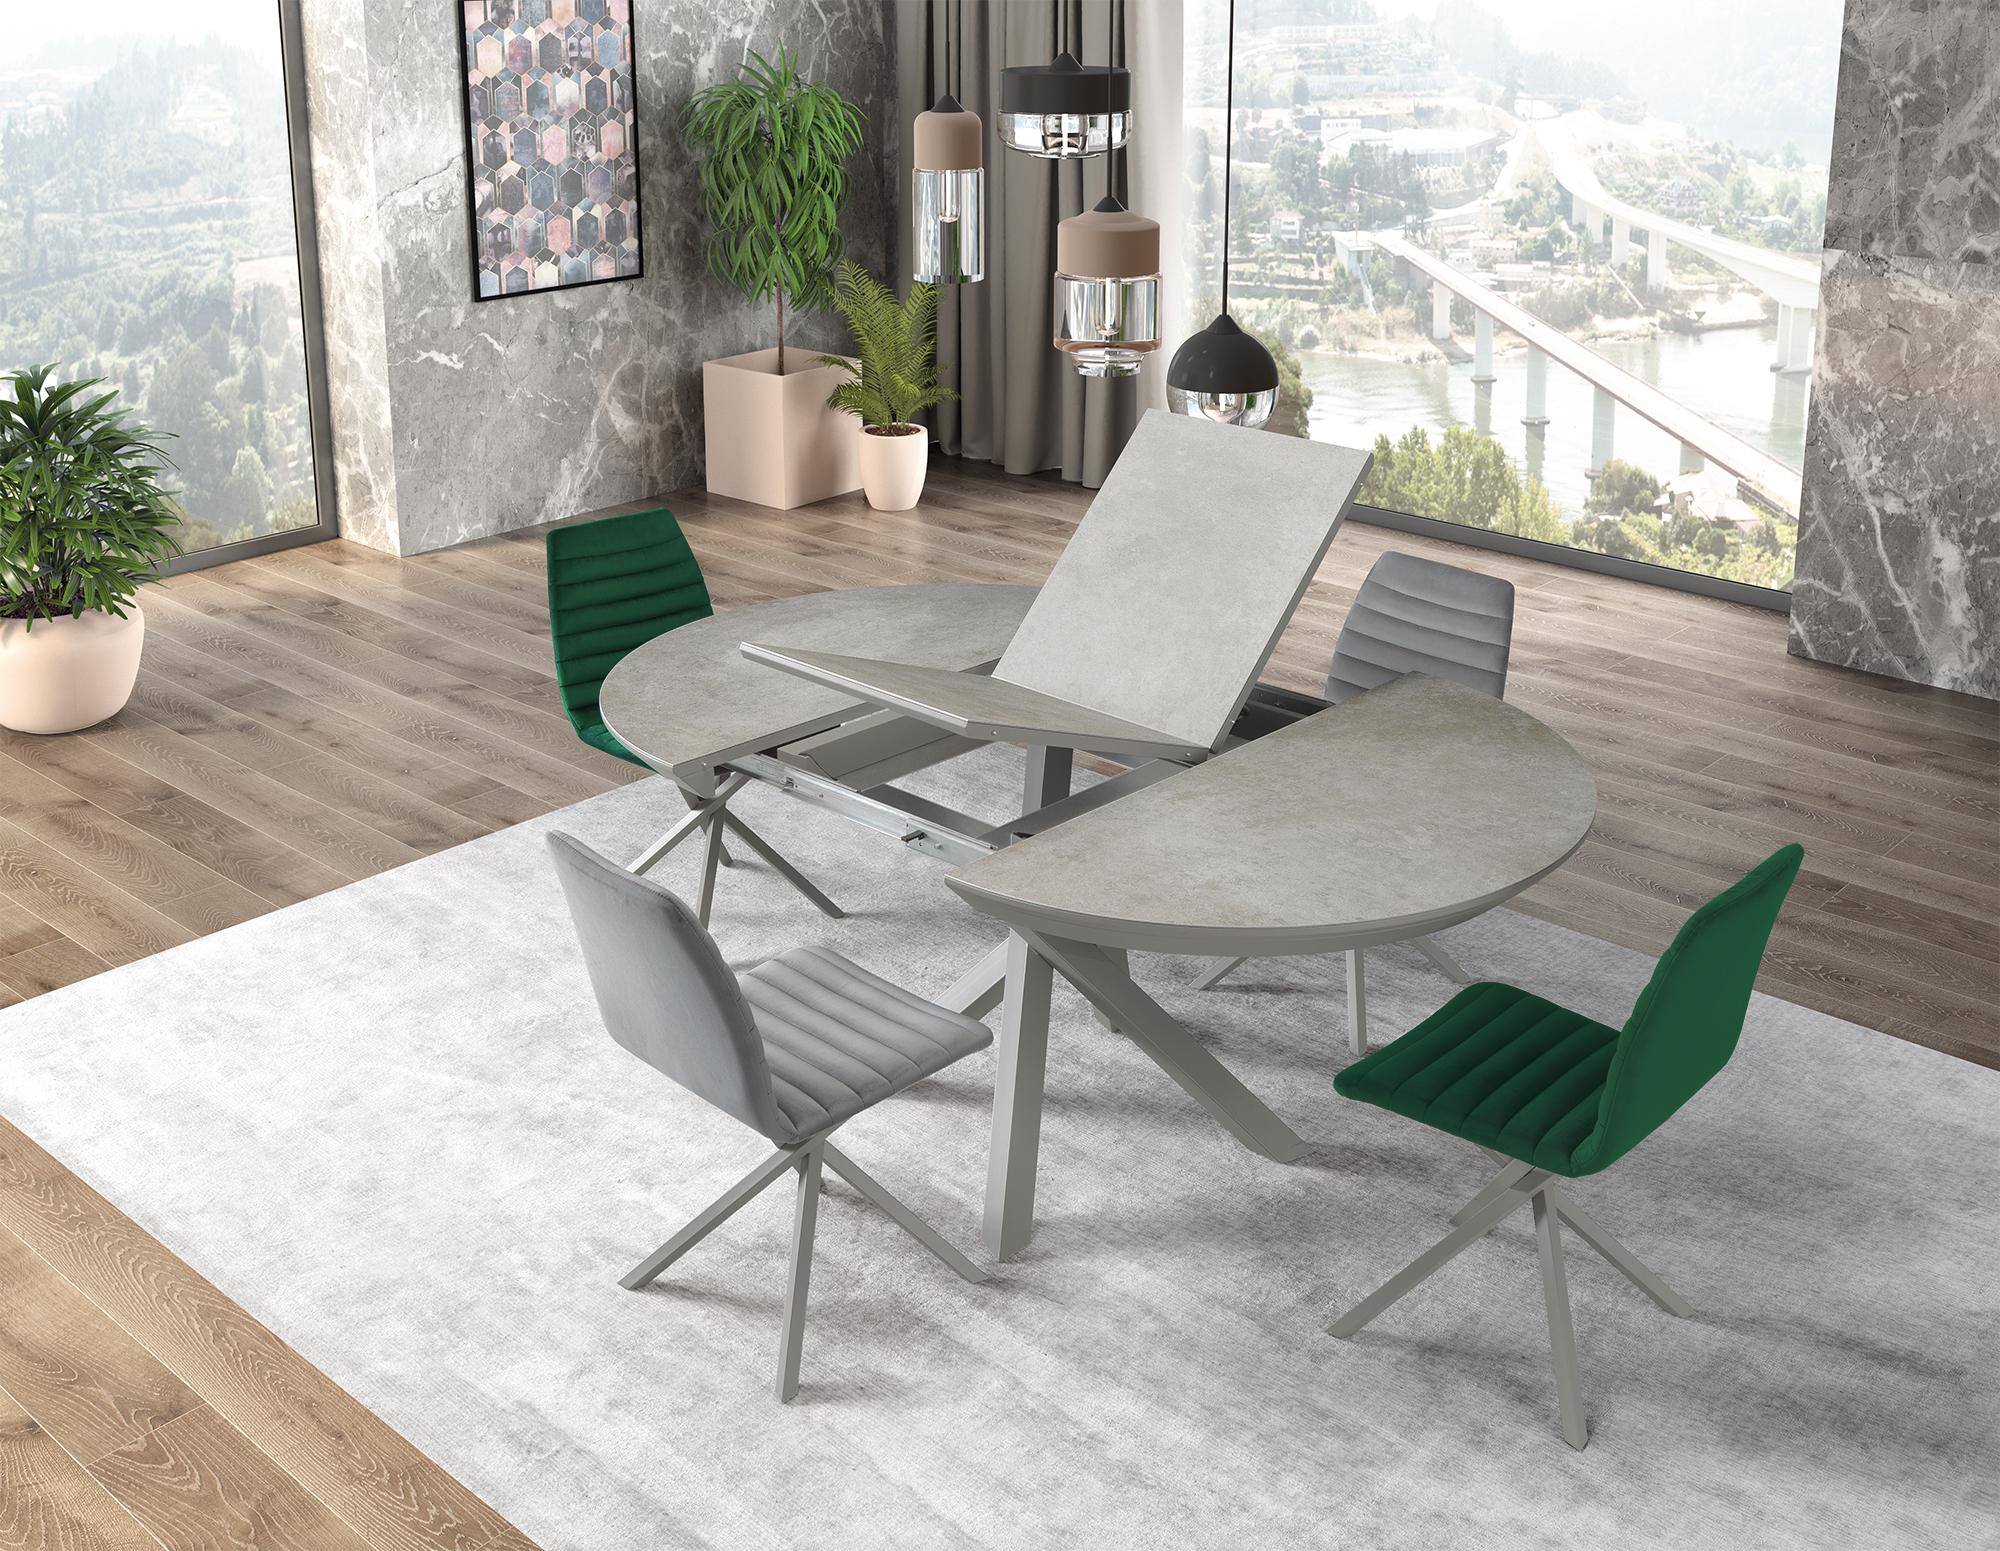 Size: D:120cm W:120cm H:77cm extentable with 50cm
Materials: legs in lacquered metal, any color, top WOOD

Puzzle extendable round dining table, which is 100% produced in Portugal, Europe, is available in different sizes and shapes: Oval,